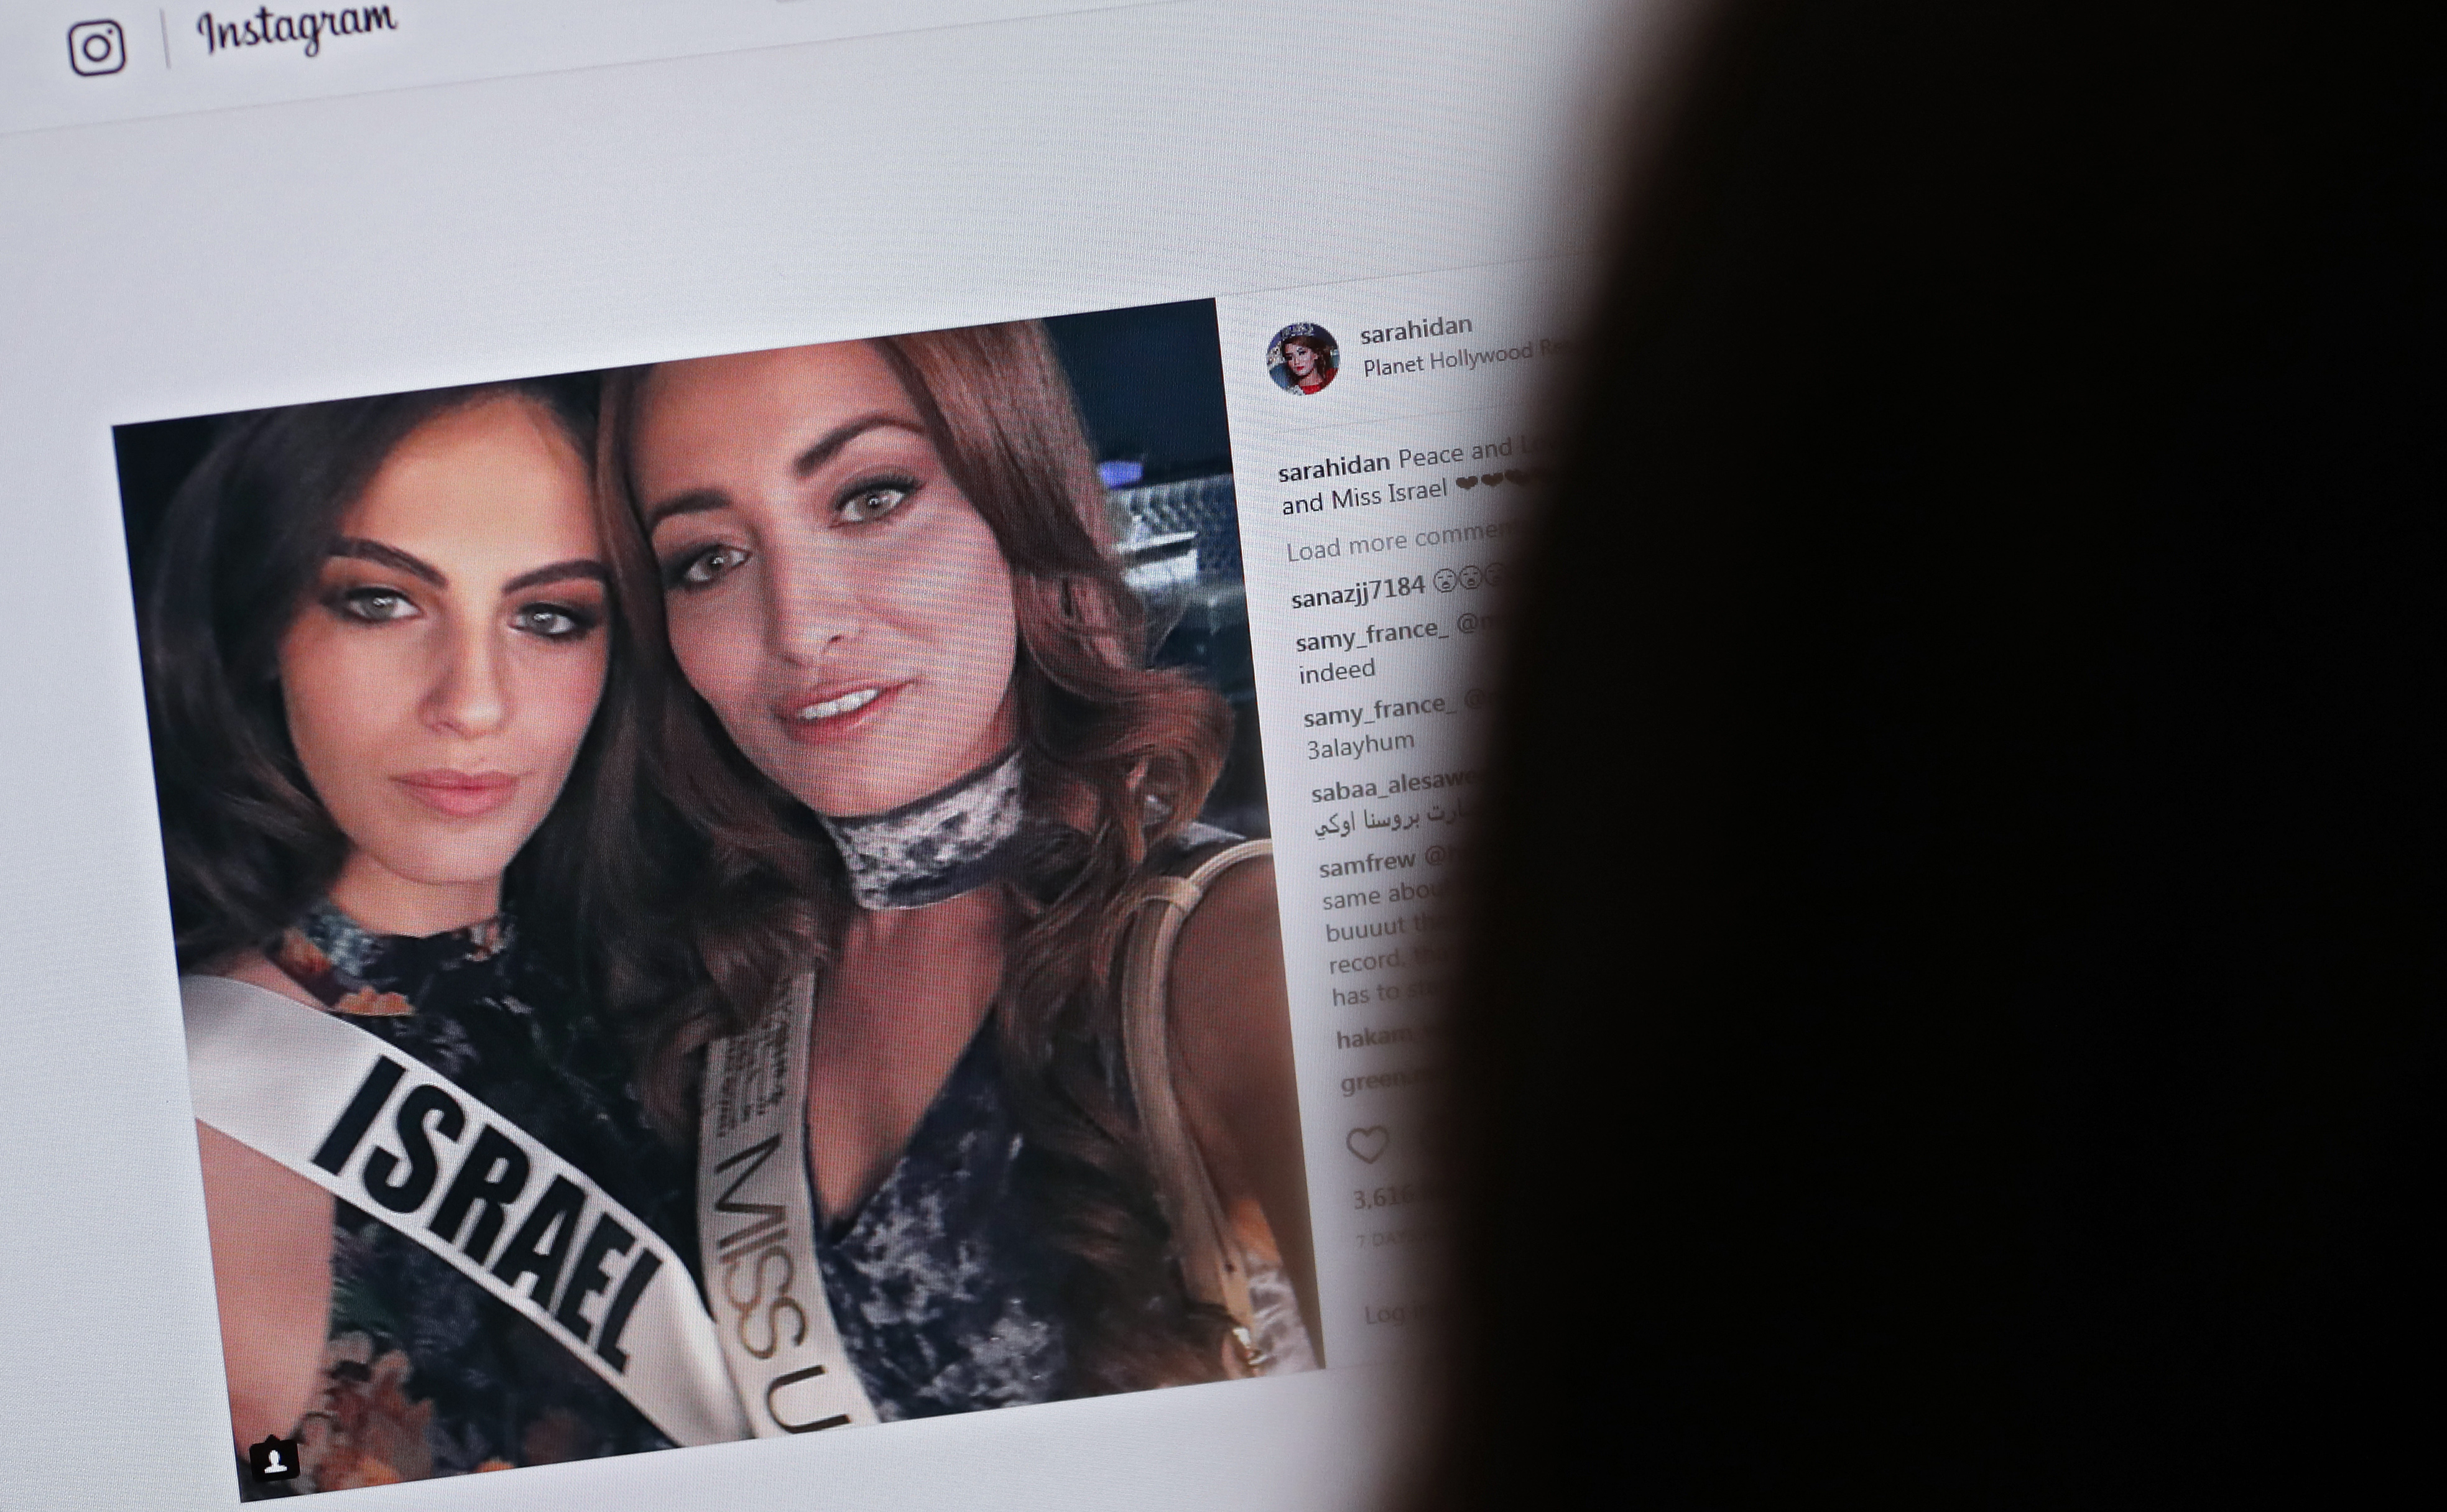 A picture taken on November 21, 2017 shows a picture posted by the Instagram profile of Sarah Idan on November 14, who holds the titles of "Miss Iraq USA 2016" and "Miss Iraq Universe 2017", as she is seen taking a "selfie" photograph with Adar Gandelsman, who holds the title of "Miss Universe Israel 2017", with a caption reading: "Peace and Love from Miss Iraq and Miss Israel #missuniverse". (THOMAS COEX&mdash;AFP/Getty Images)